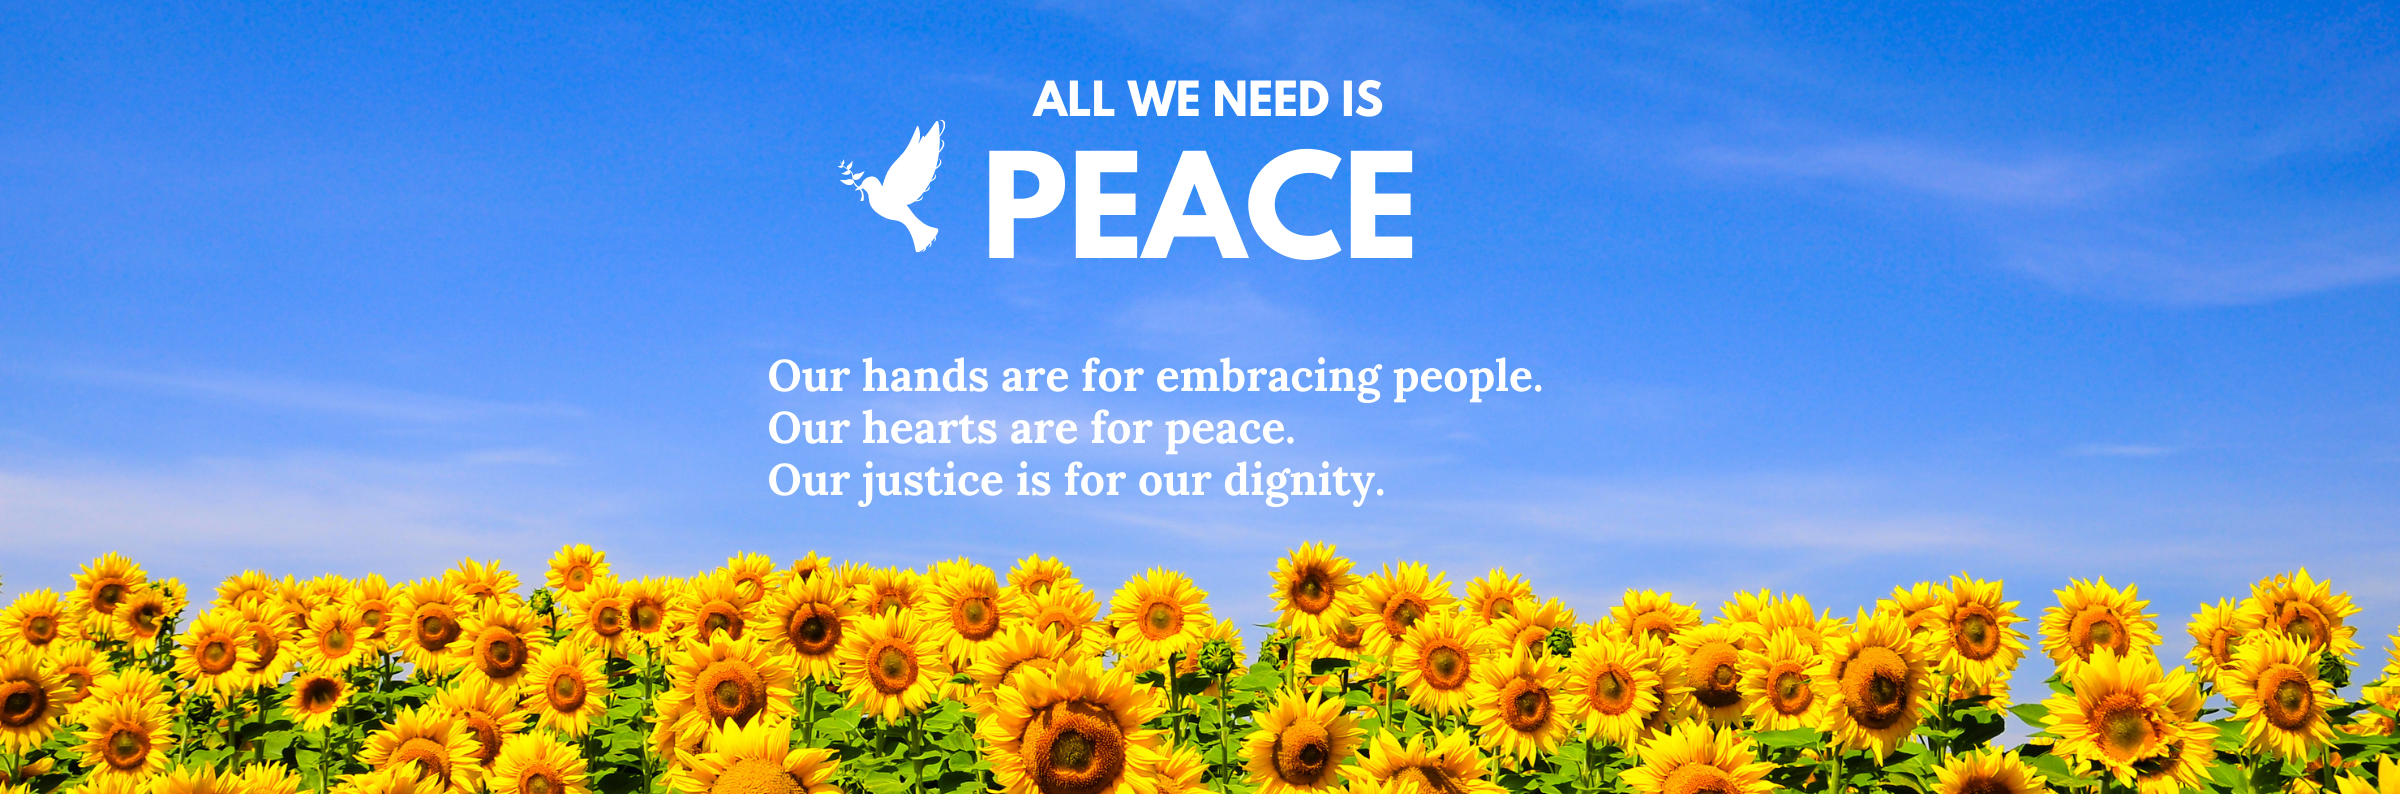 ALL WE NEED IS PEACE